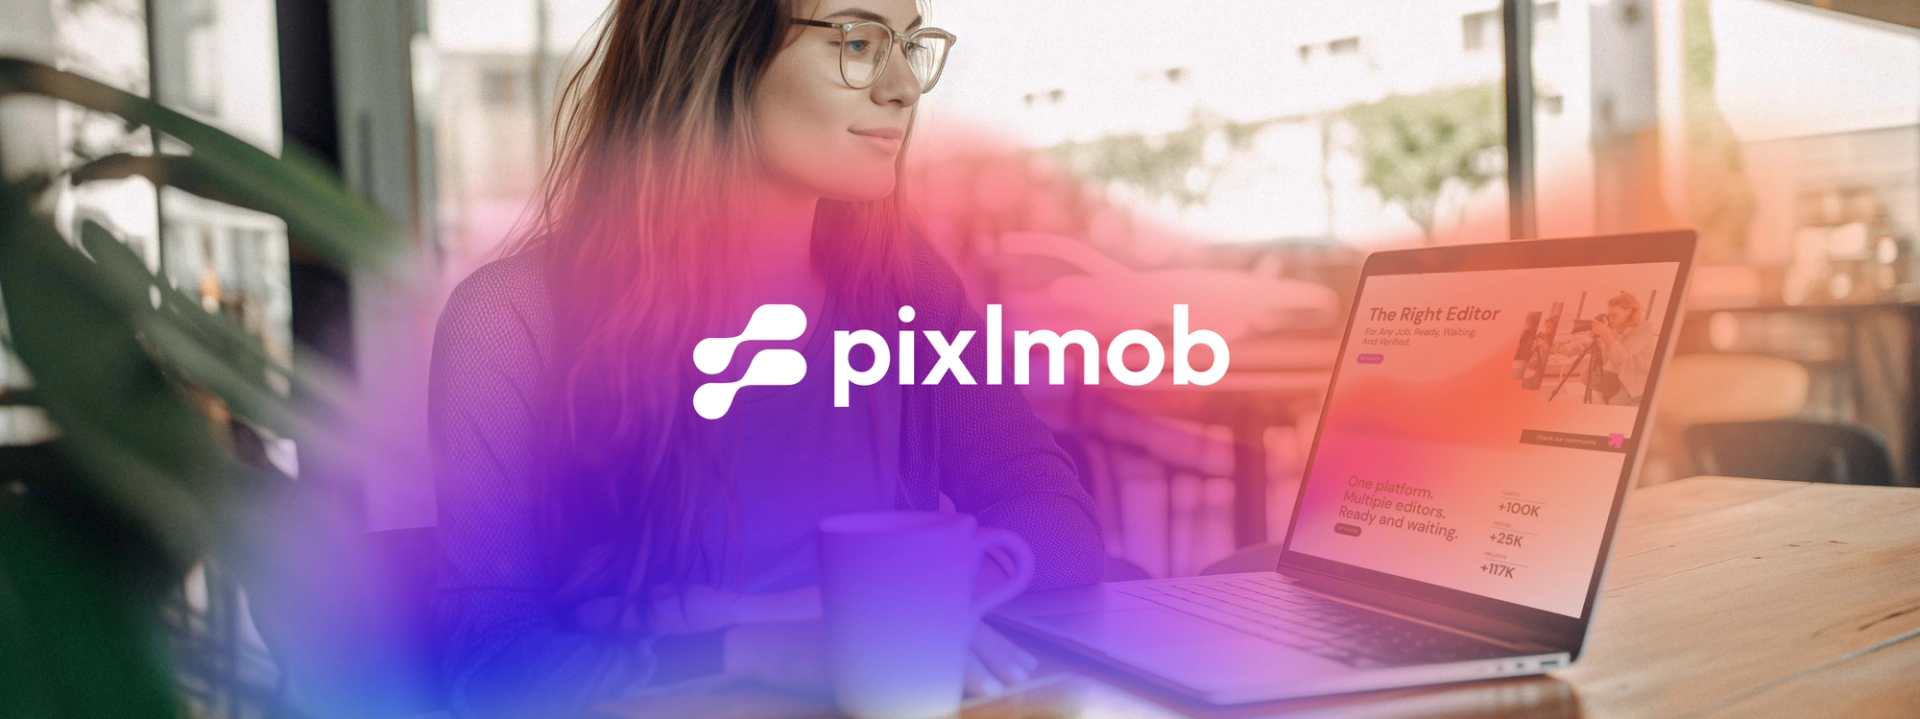 Pixlmob and Superside Partnership: Elevating Real Estate Media with AI-Driven Rebranding